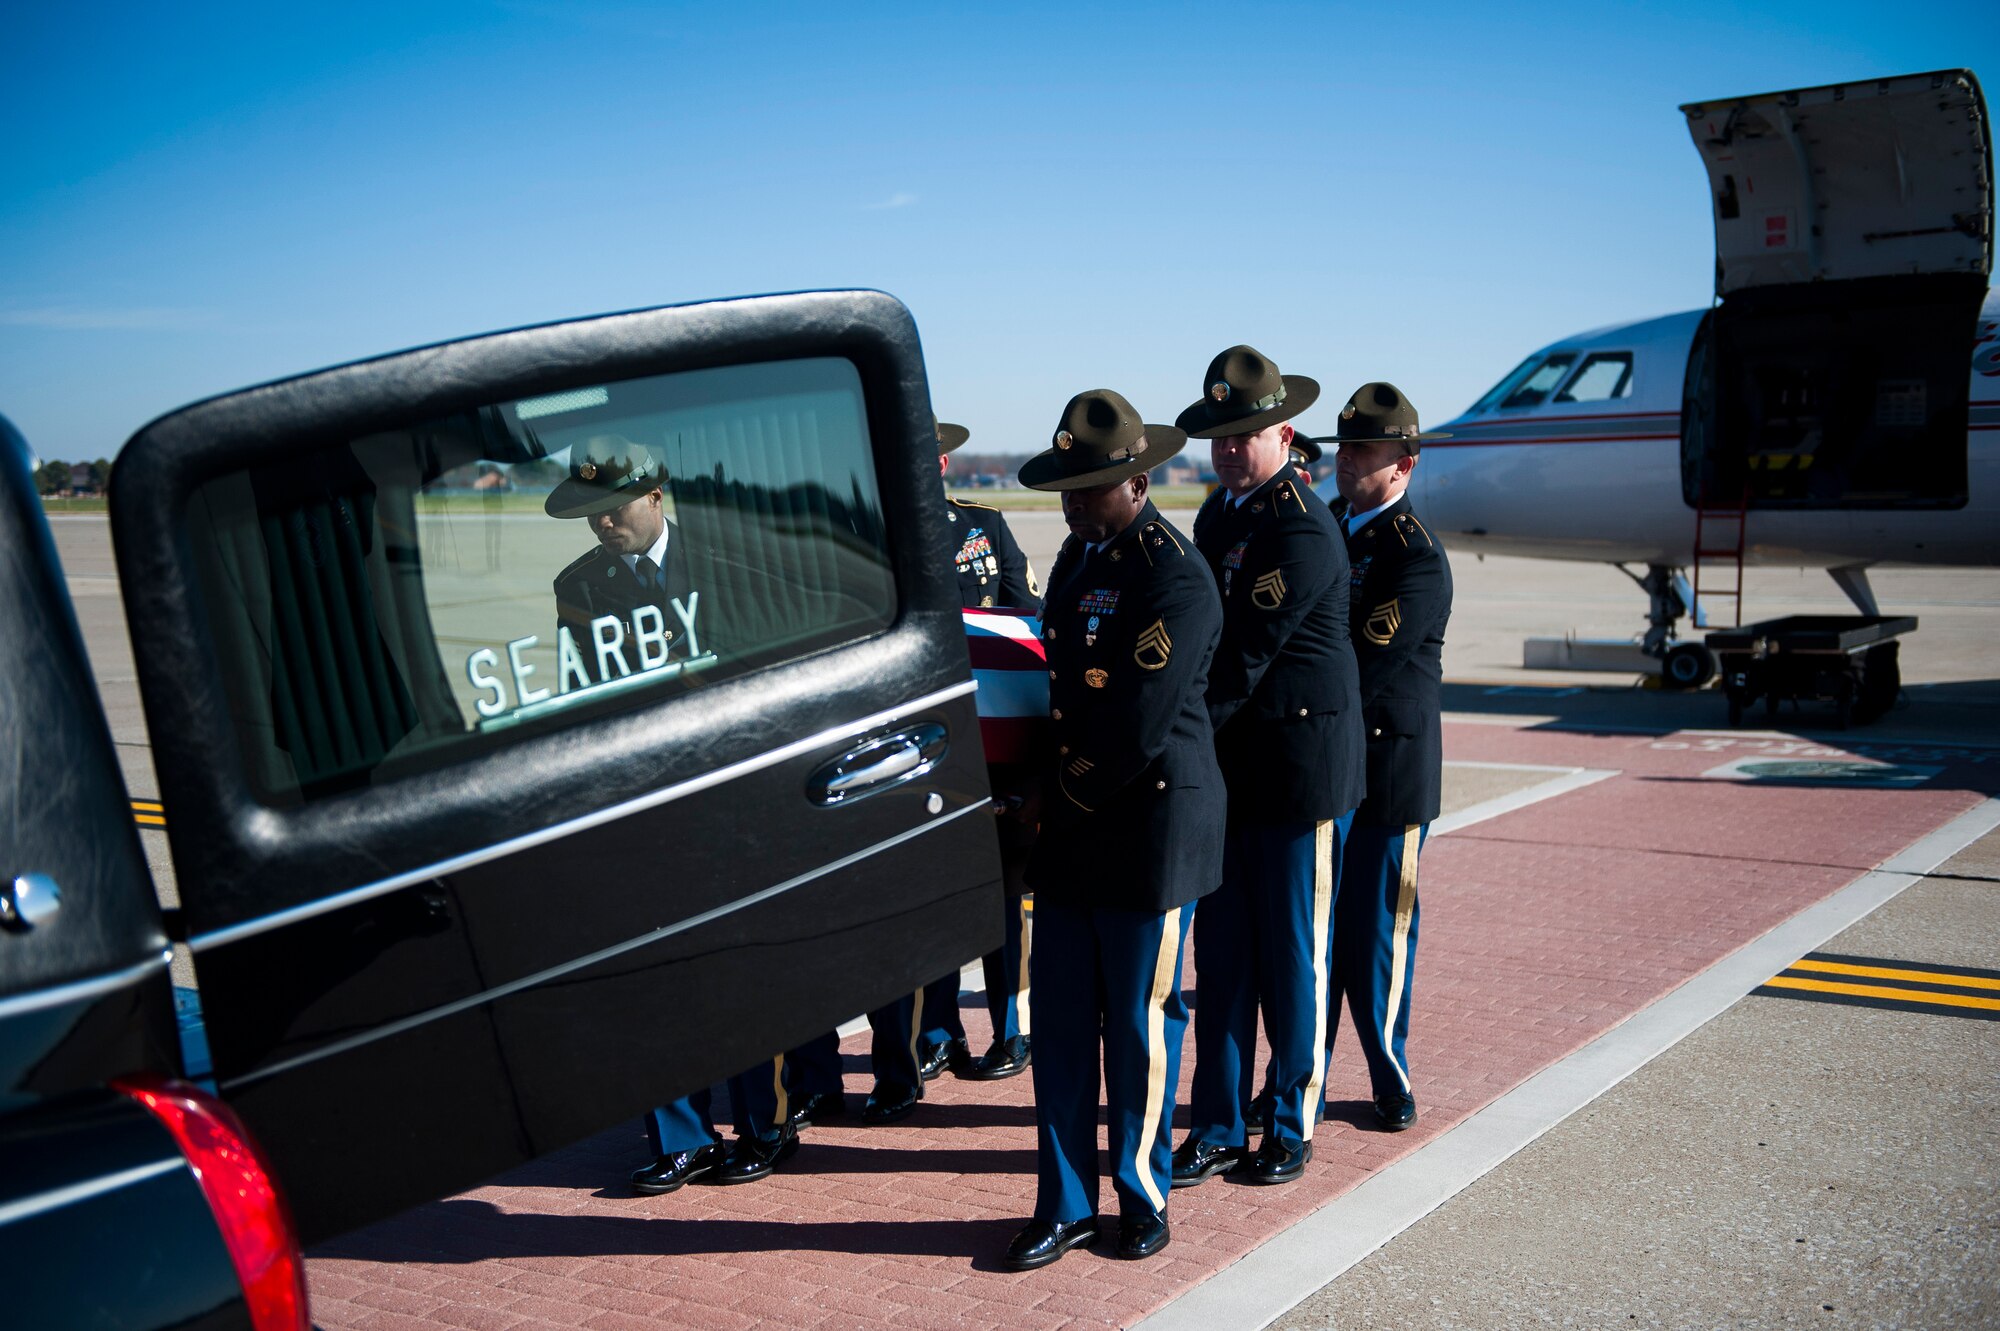 Members of the Fort Leonard Wood honor guard carry the remains of Pfc. Tyler Iubelt during a dignified transfer ceremony 21 Nov., 2016, at Scott Air Force Base, Illinois. Iubelt passed away on 12 Nov. while deployed to Bagram, Afghanistan. (U.S. Air Force photo by Staff Sgt. Clayton Lenhardt)